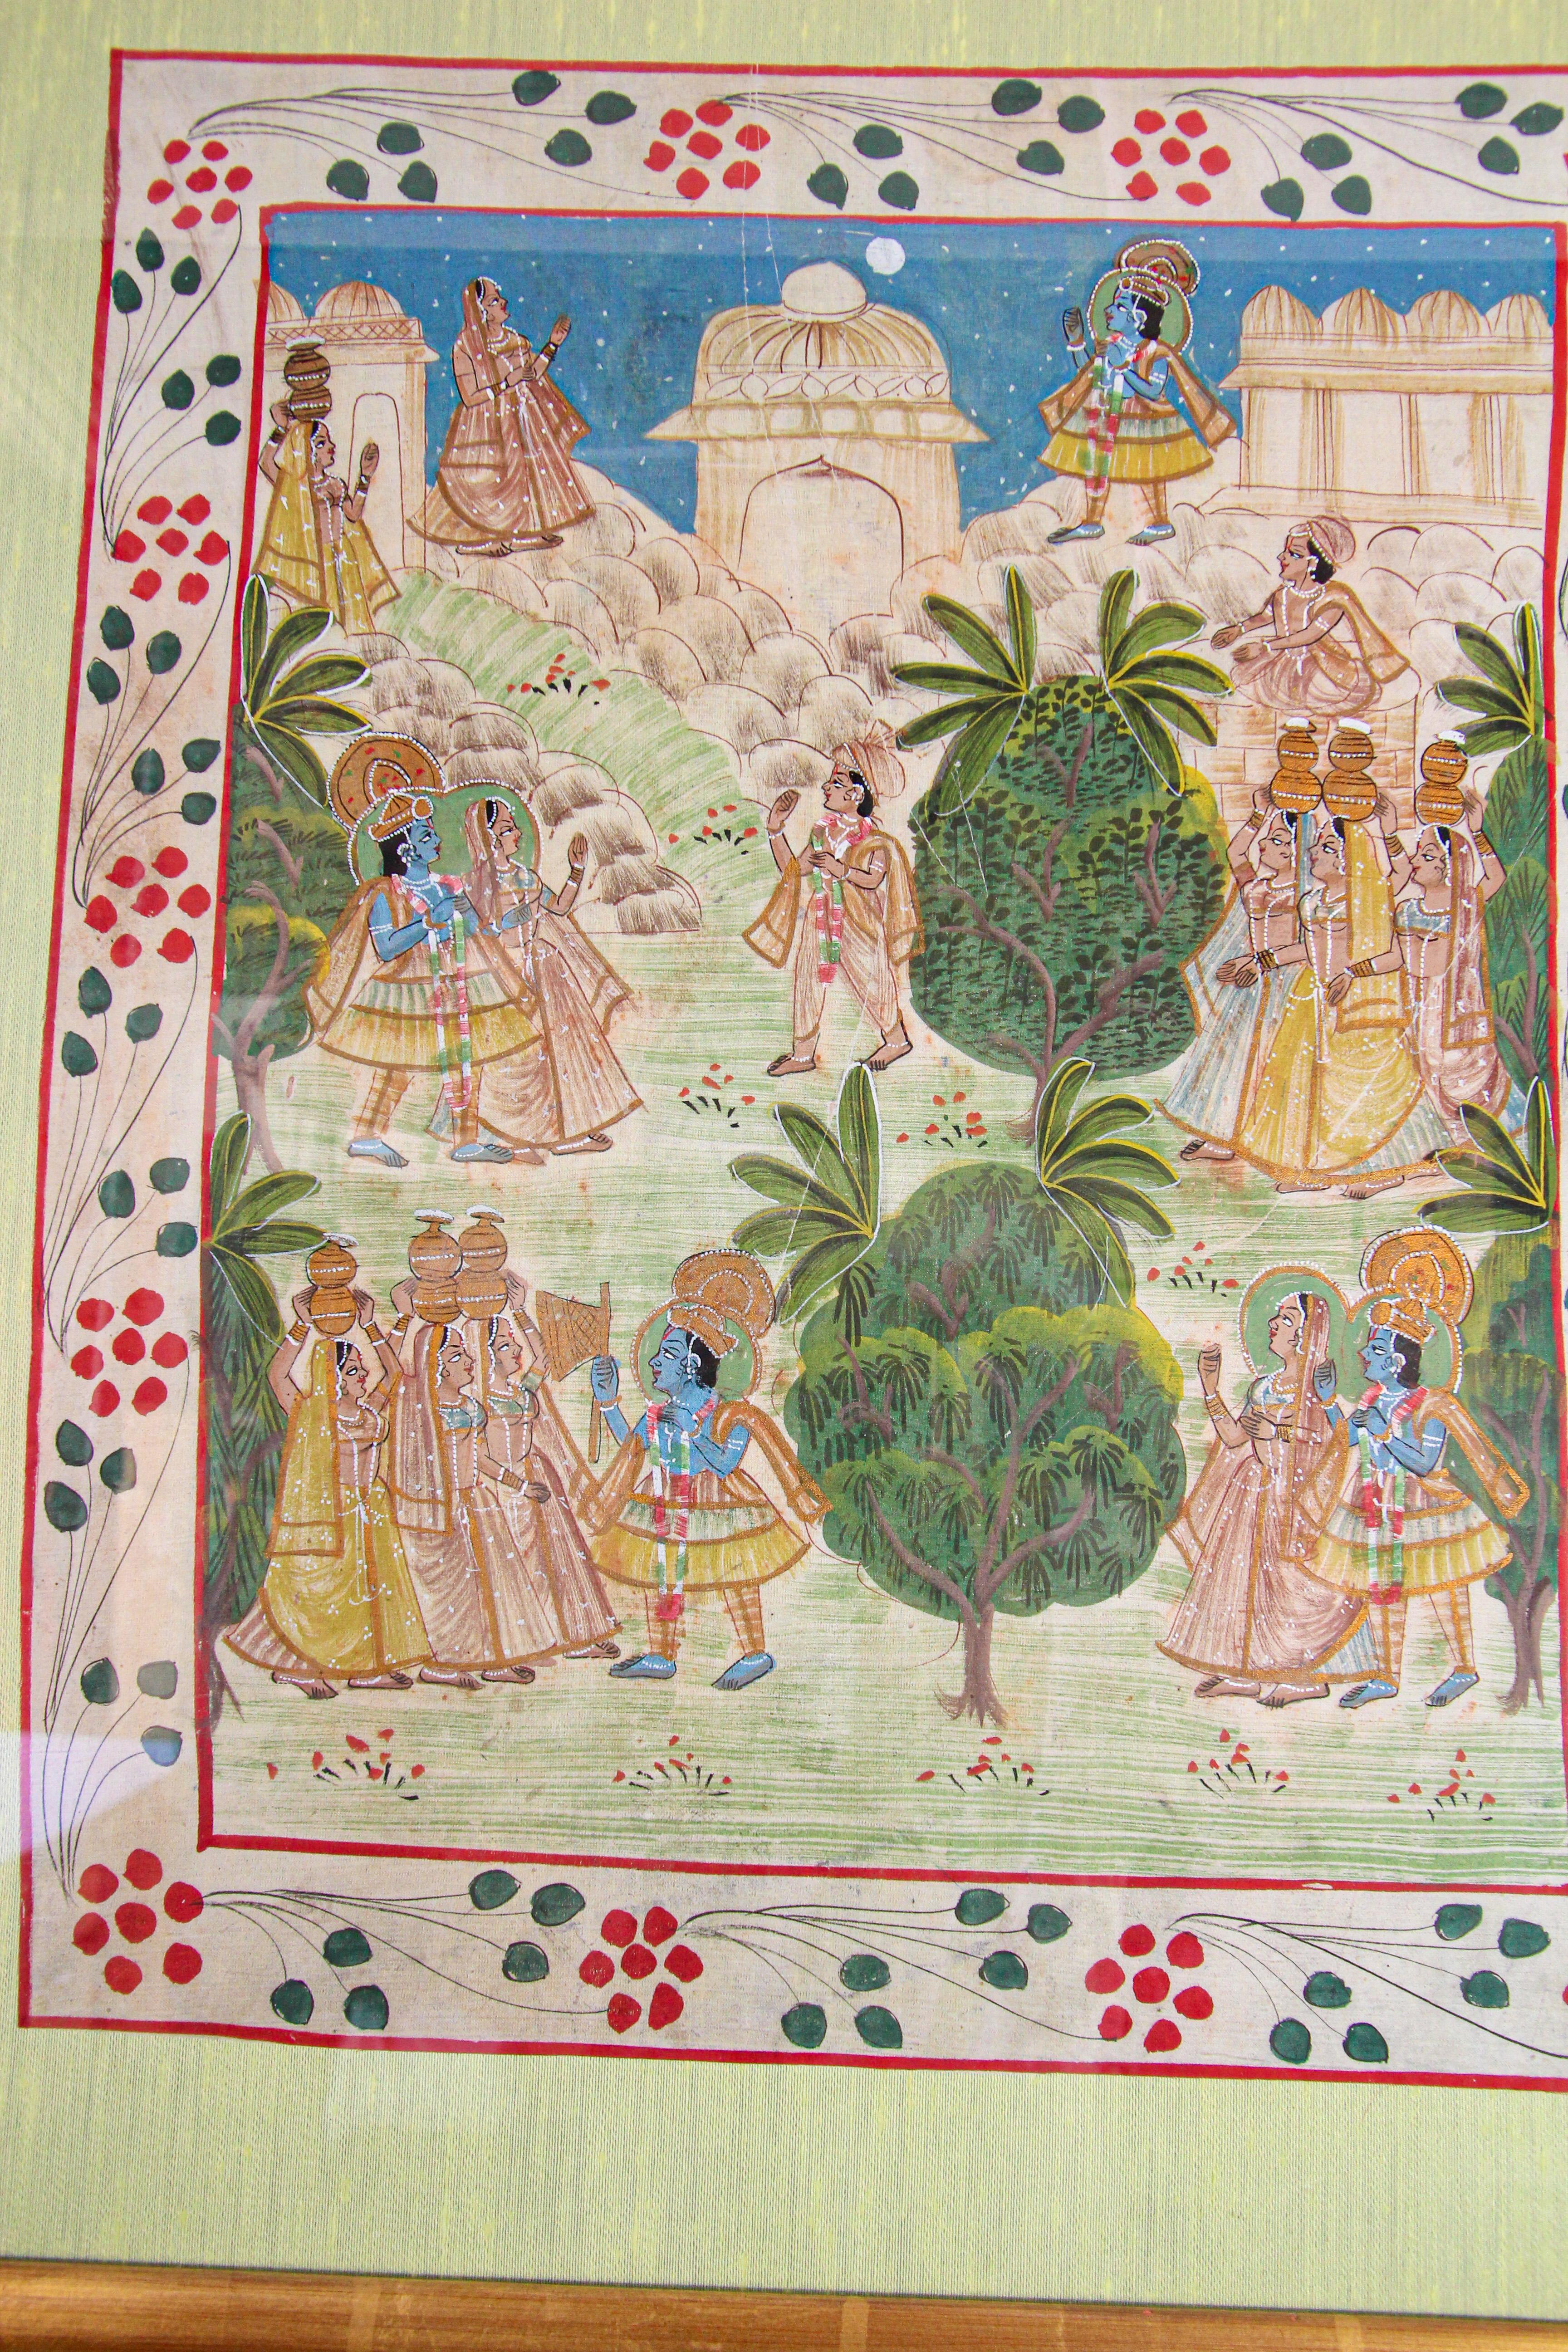 Krishna, Radha, and the Gopis Meet a Young Prince, Picchawai Painting 7